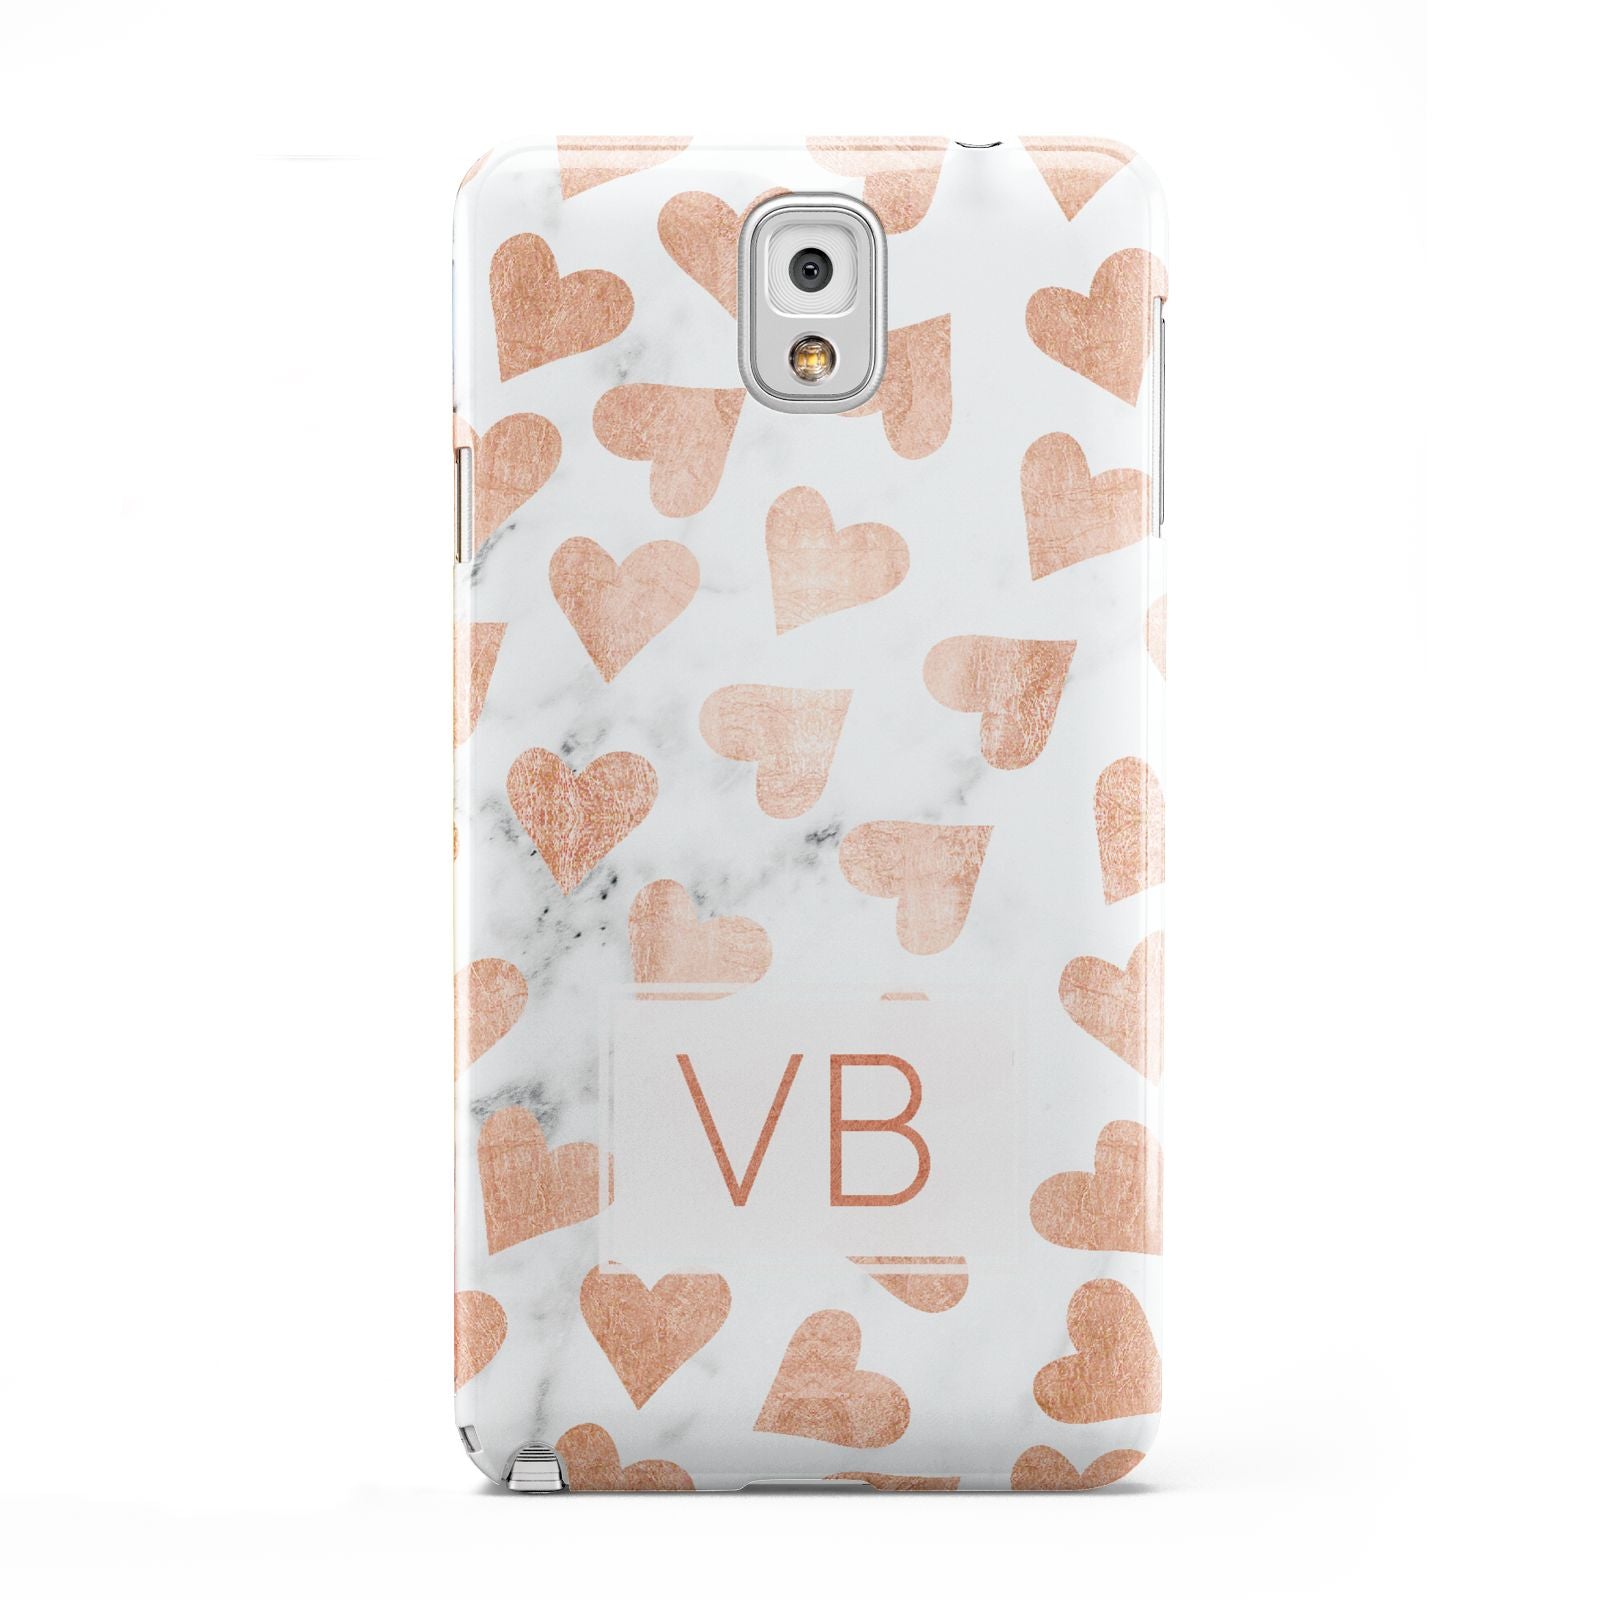 Personalised Heart Initialled Marble Samsung Galaxy Note 3 Case